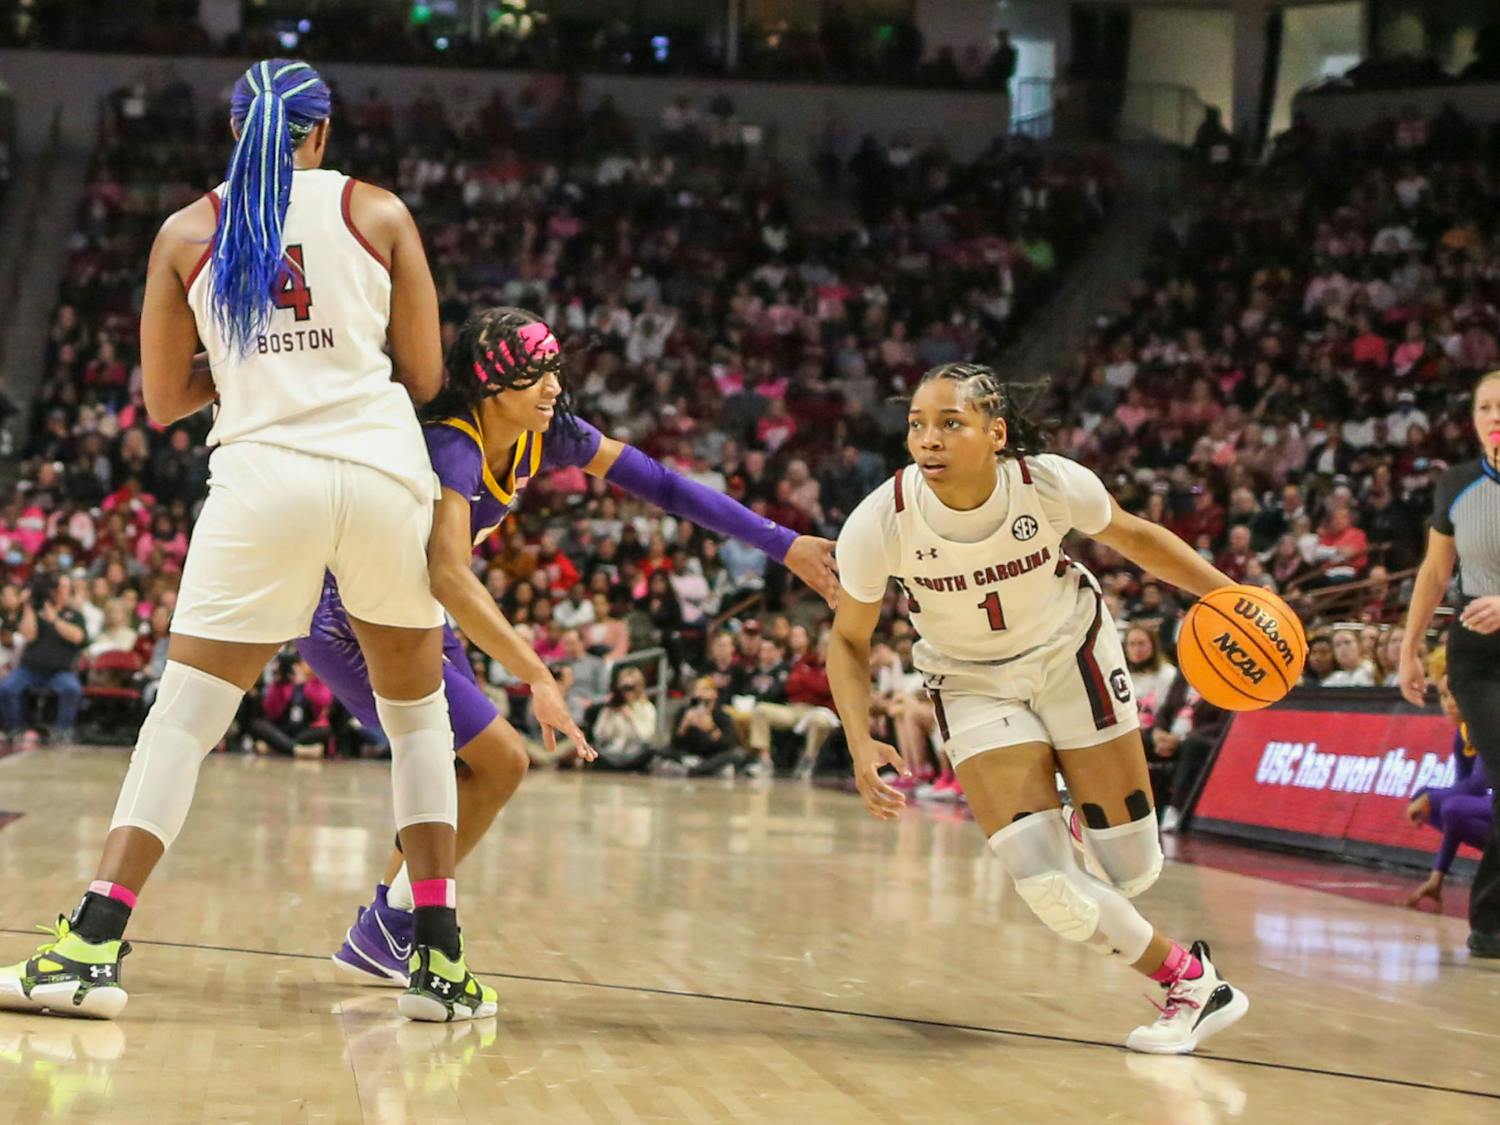 Senior guard Zia Cooke dribbles the ball through a screen set by senior forward Aliyah Boston during South Carolina’s game against LSU at Colonial Life Arena on Feb. 12, 2023. The Gamecocks beat the Tigers 88-64. 